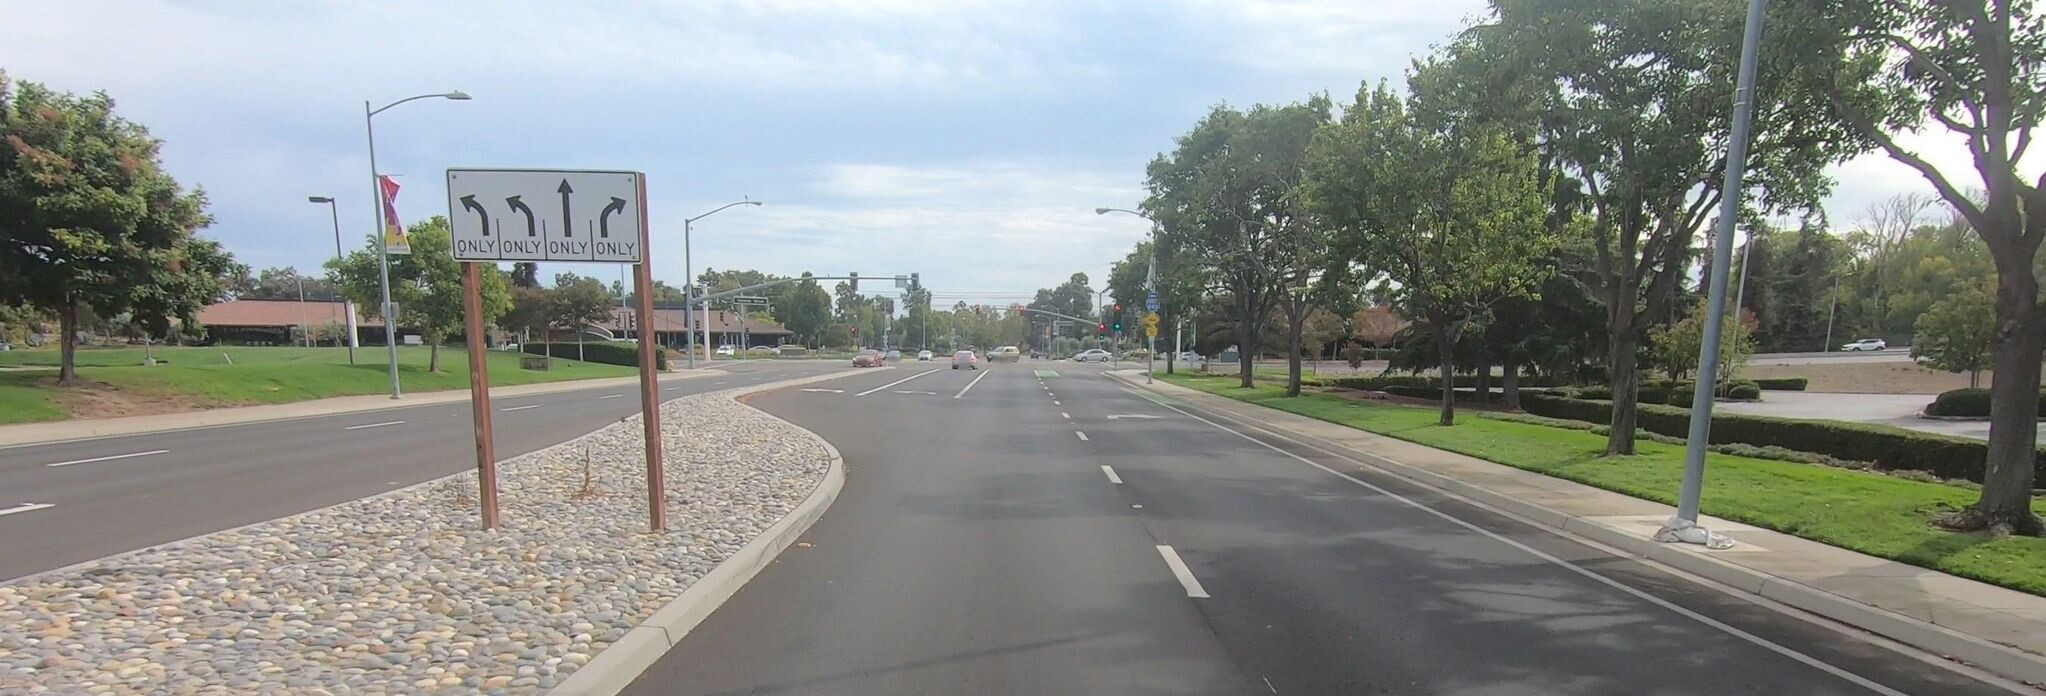 Approaching an intersection, a lane use diagram sign indicates two left turn lanes, a through lane, and a right turn lane, but omits the short through bike lane, marked in green in the distance. (© 2021 networklanman, CC BY-SA 4.0)